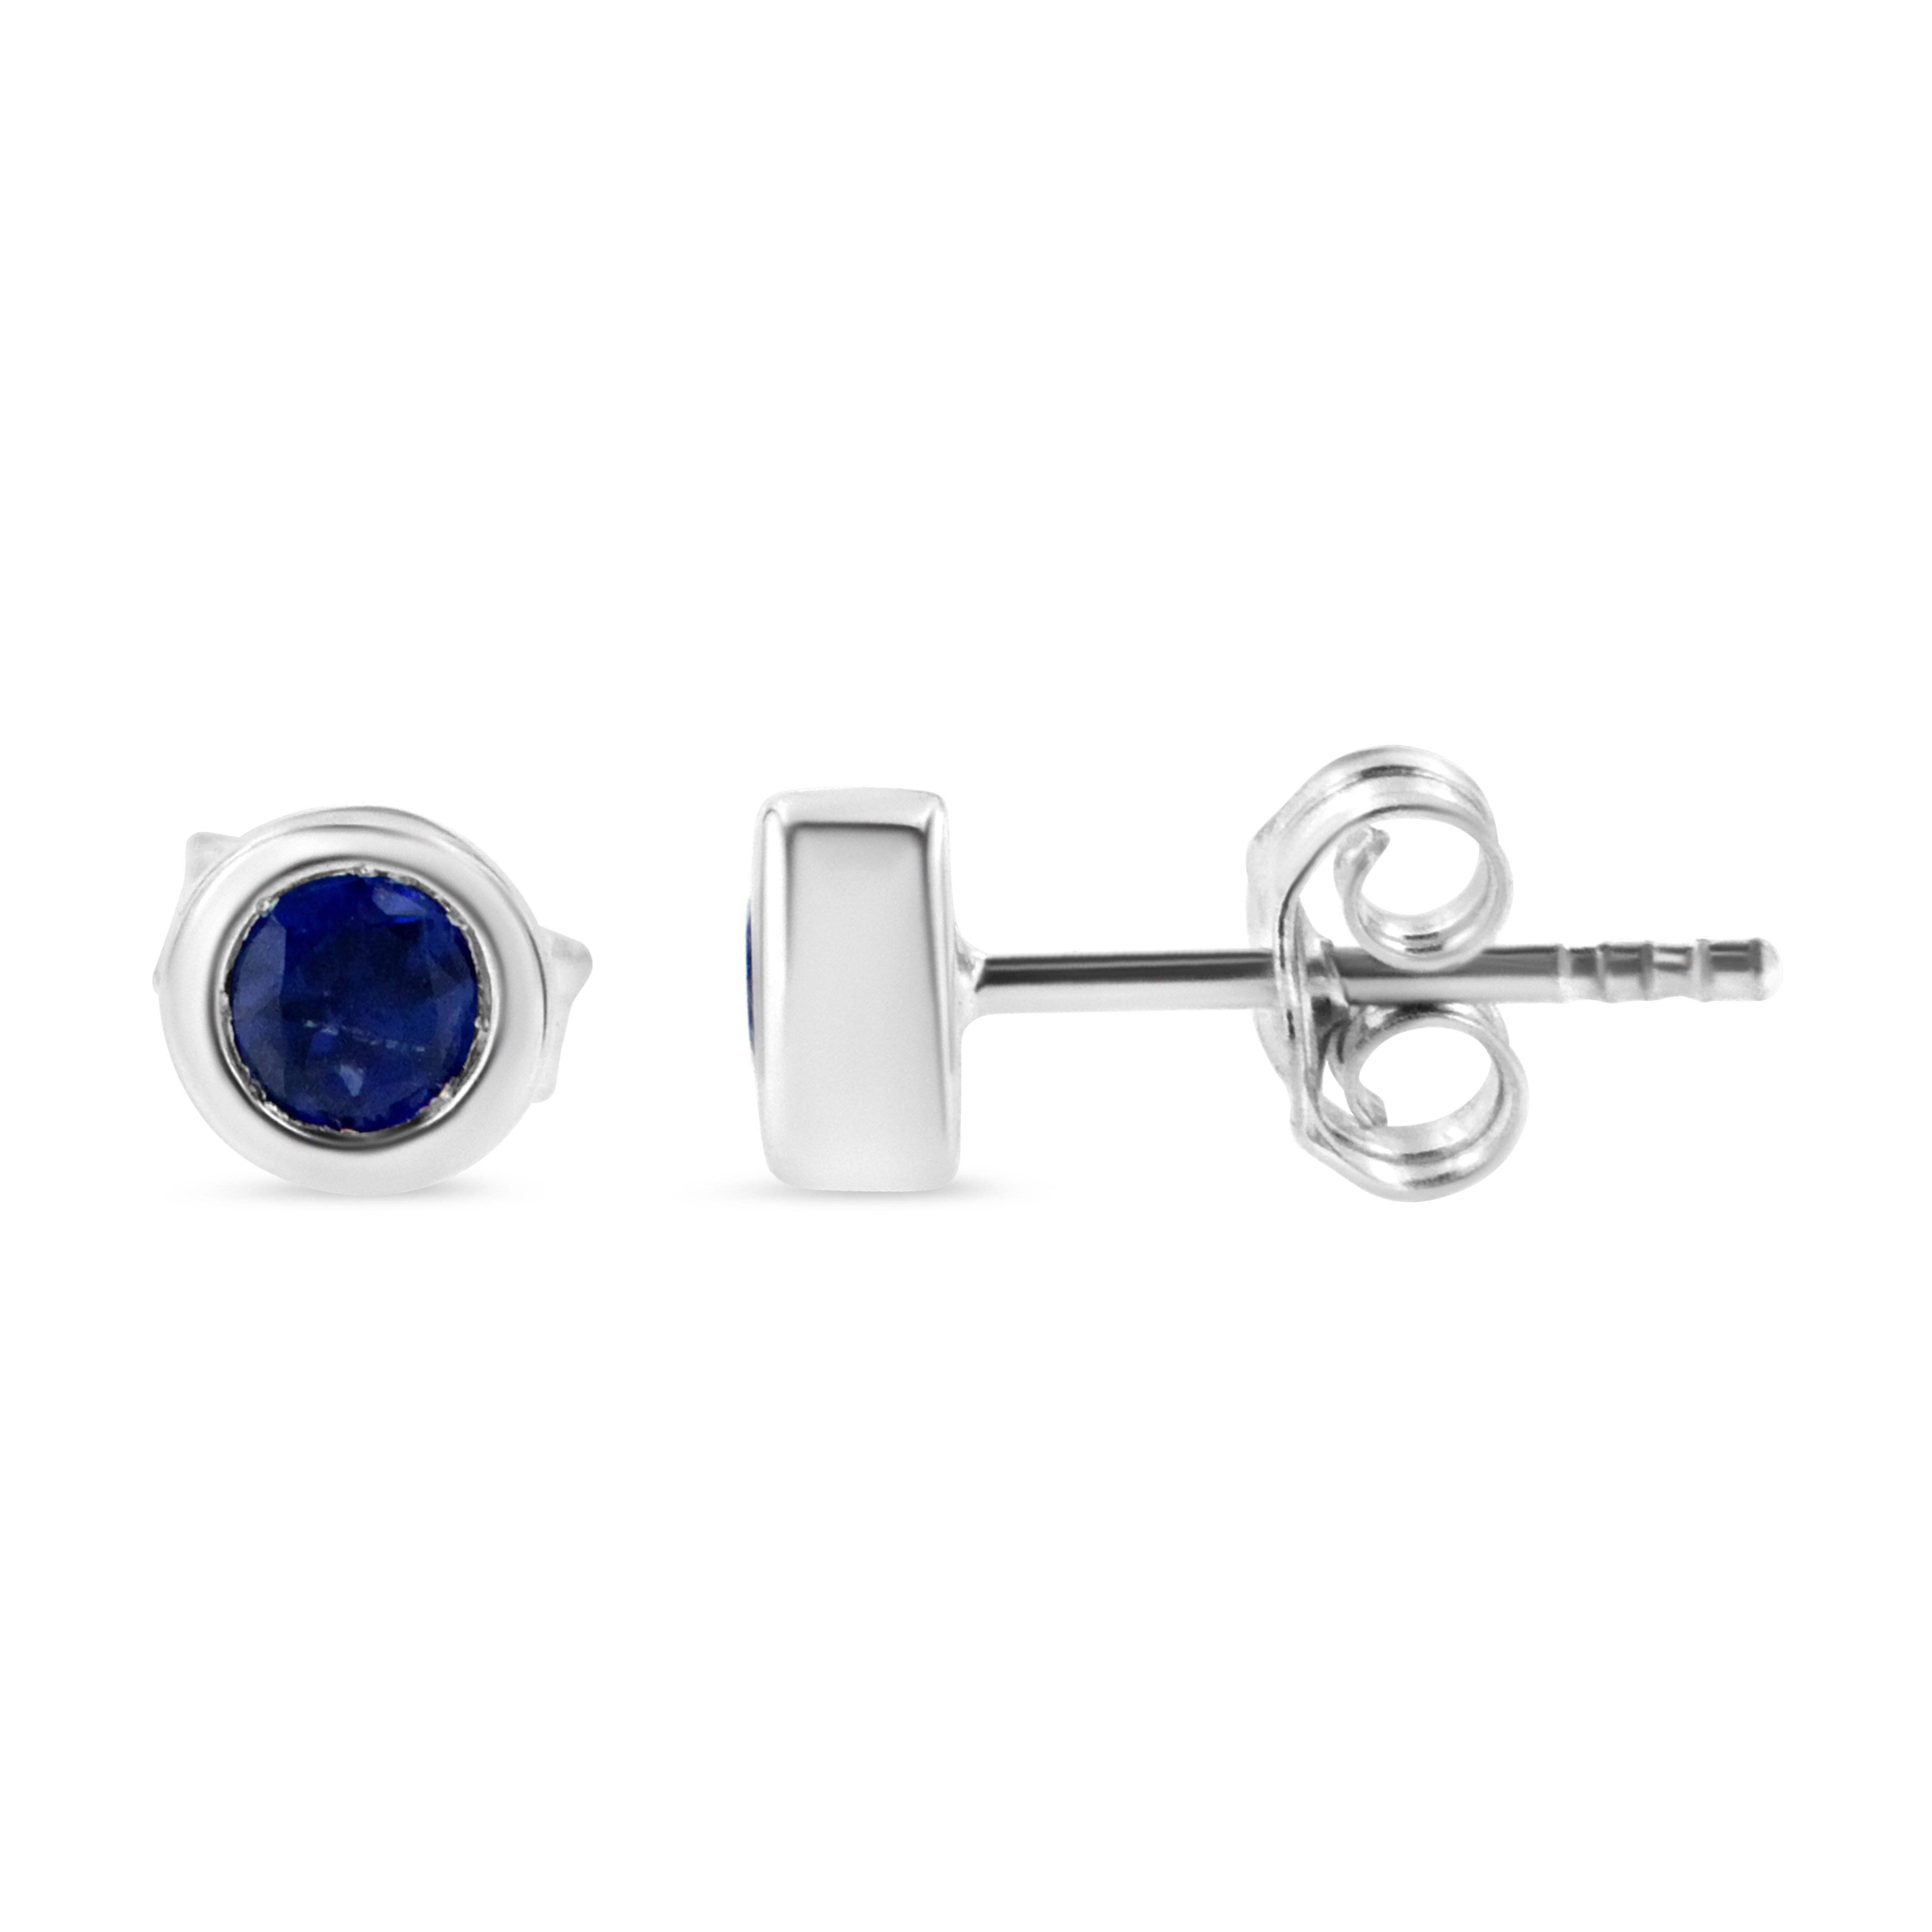 Striking and timeless, these stunning .925 sterling silver solitaire stud earrings feature bold sapphire gemstones in a bezel setting. The gemstones are 3.5mm and treated blue in color. The notched posts and friction backs keep these pierced